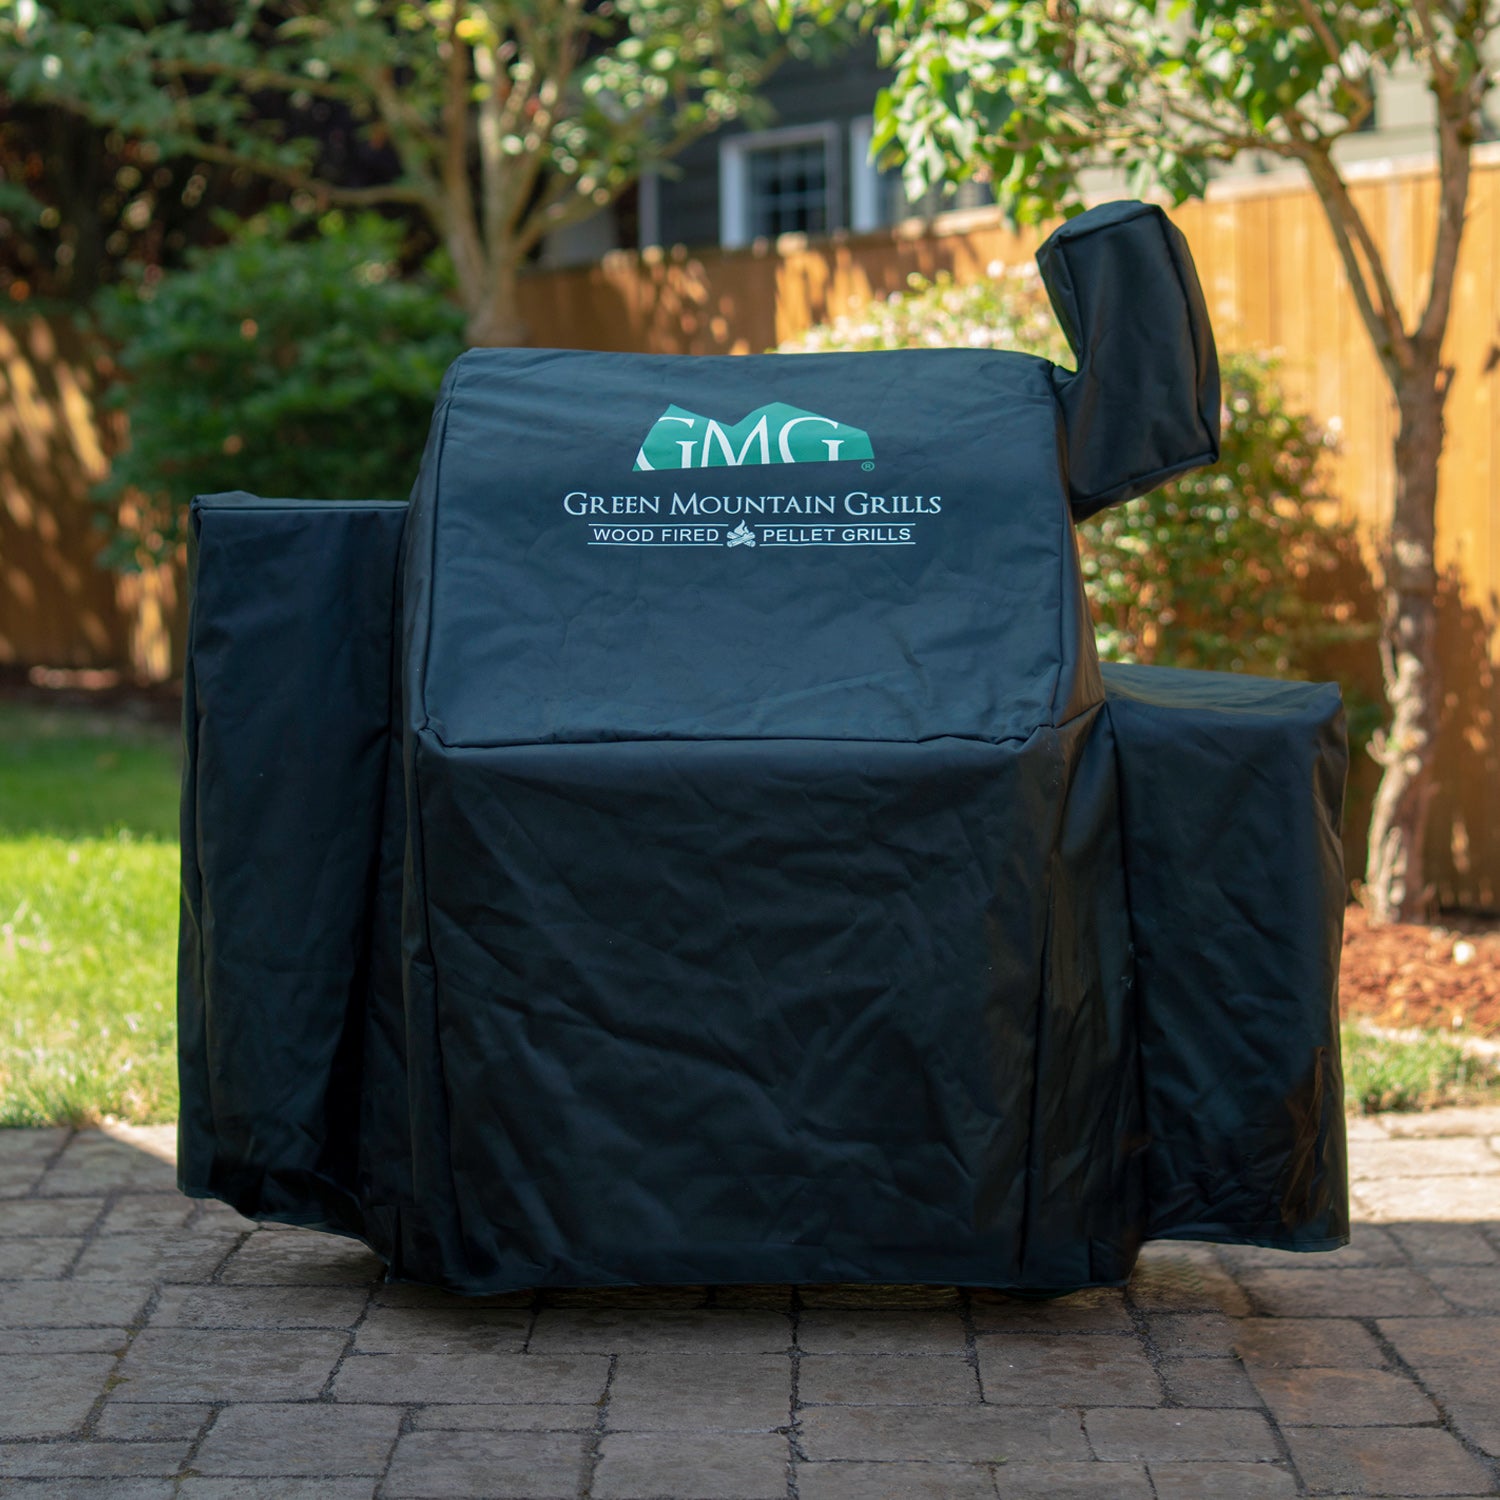 Green Mountain Grills Daniel Boone Prime WIFI Grill Cover GMG-3003